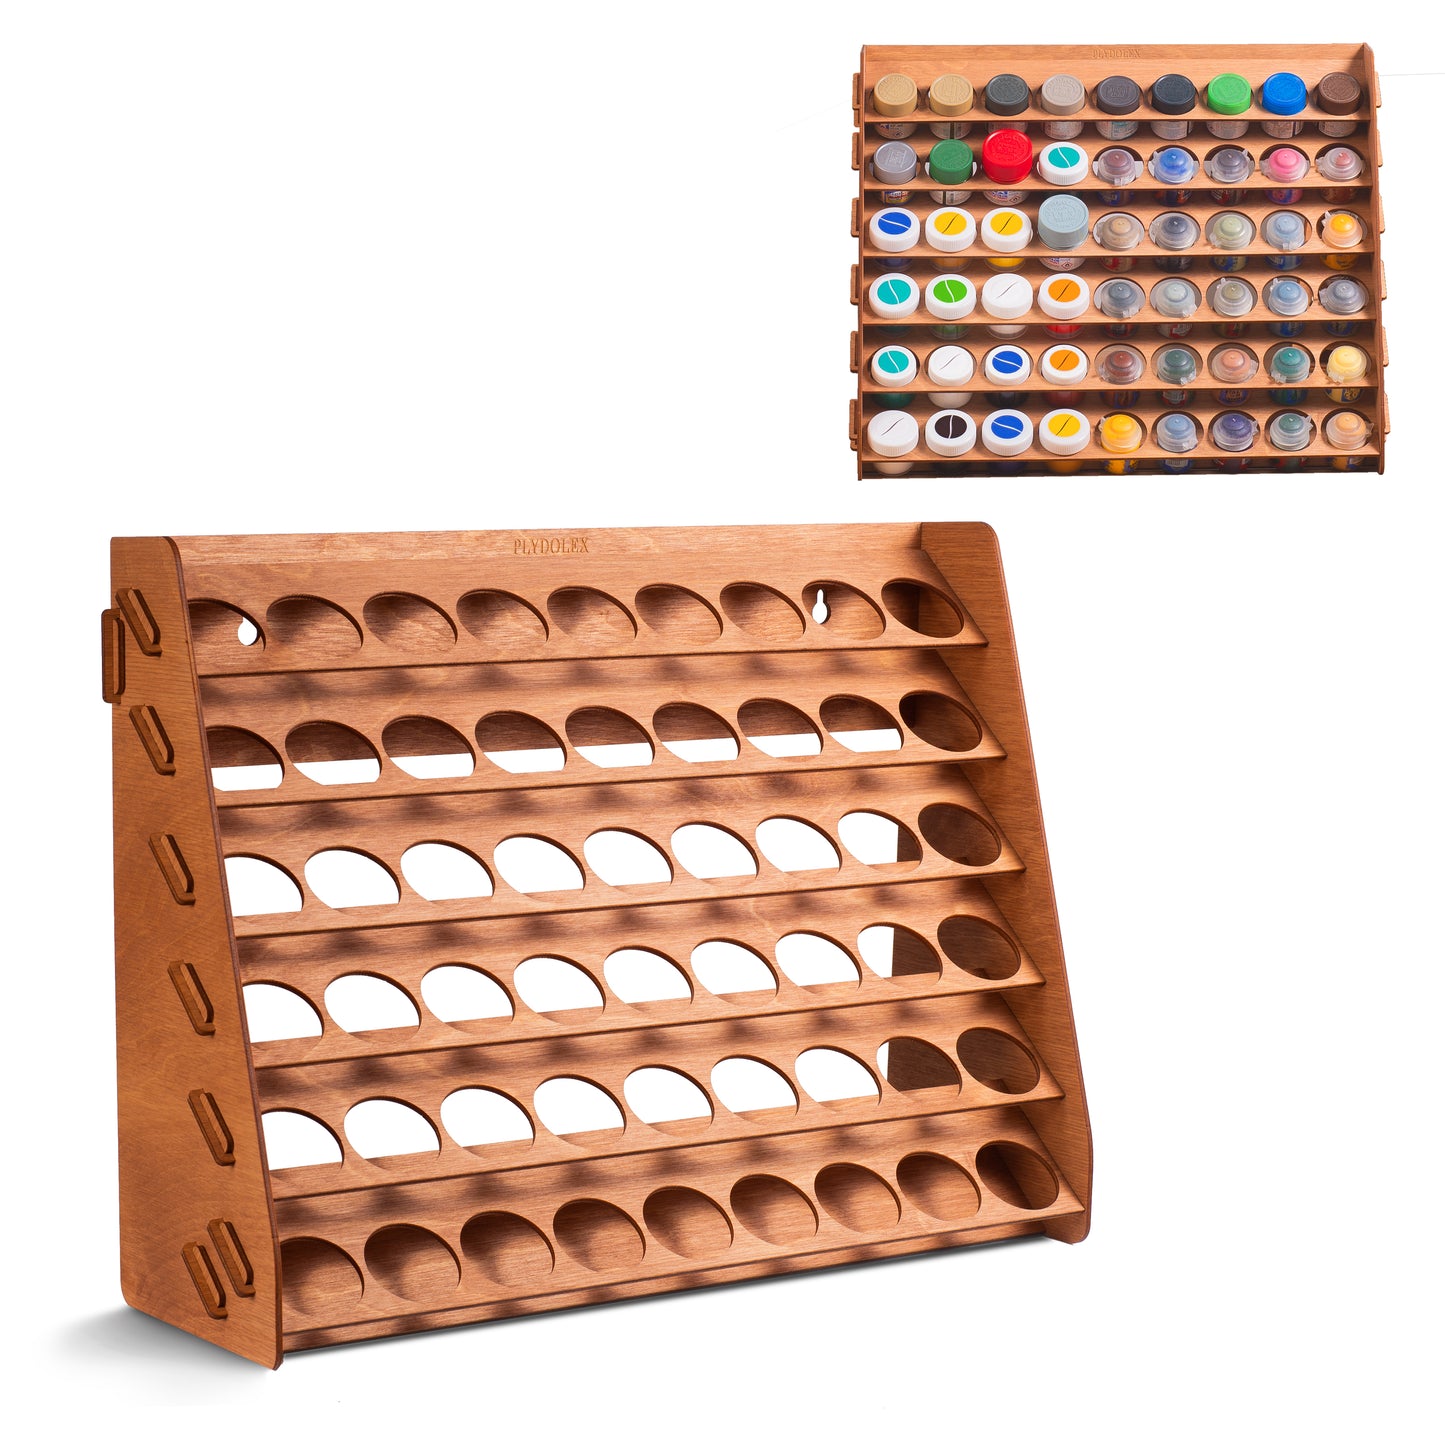 Plydolex Wooden Craft Paint Storage Rack with 58 Holes for Paint Bottles - Hand Craft Paint Holder Rack with 4 Miniature Stands and Removable Upper